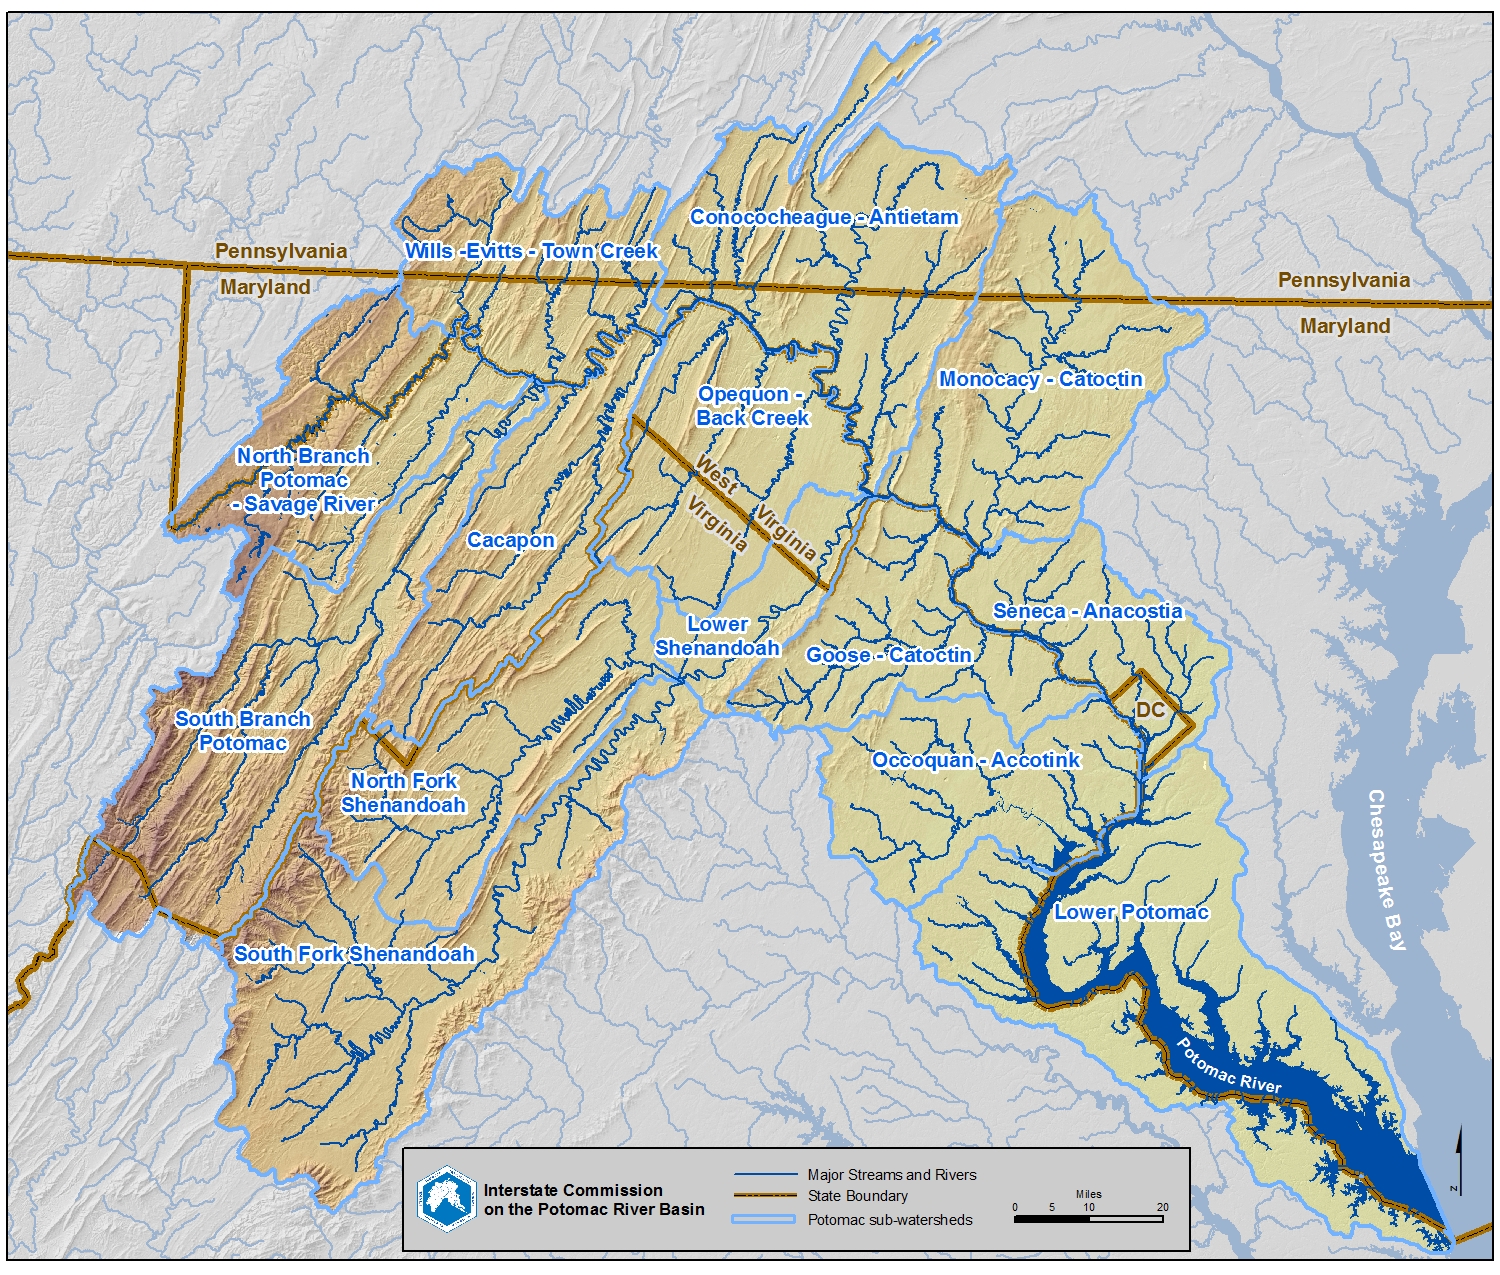 Sub watersheds in the Potomac River basin